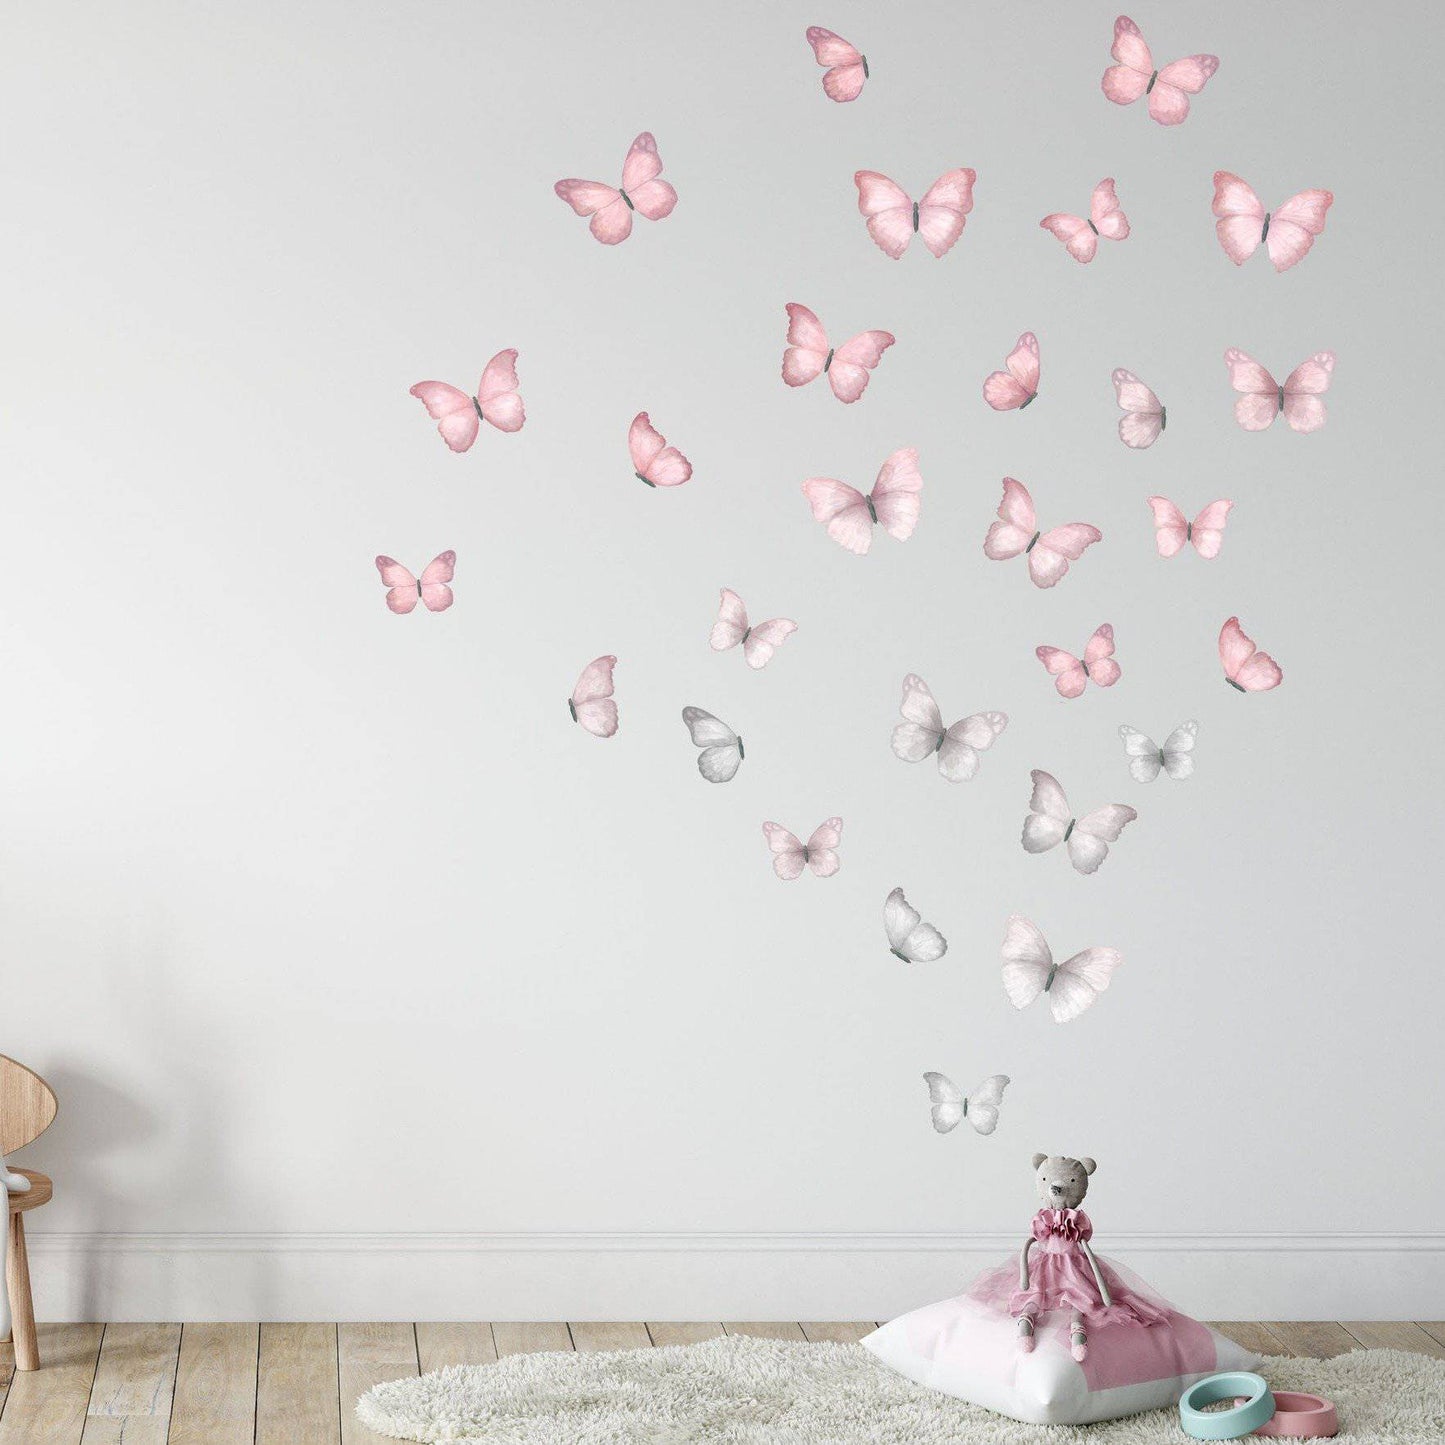 Butterfly Wall Decals (Pink & Grey) - Wall Decals - Fable and Fawn 